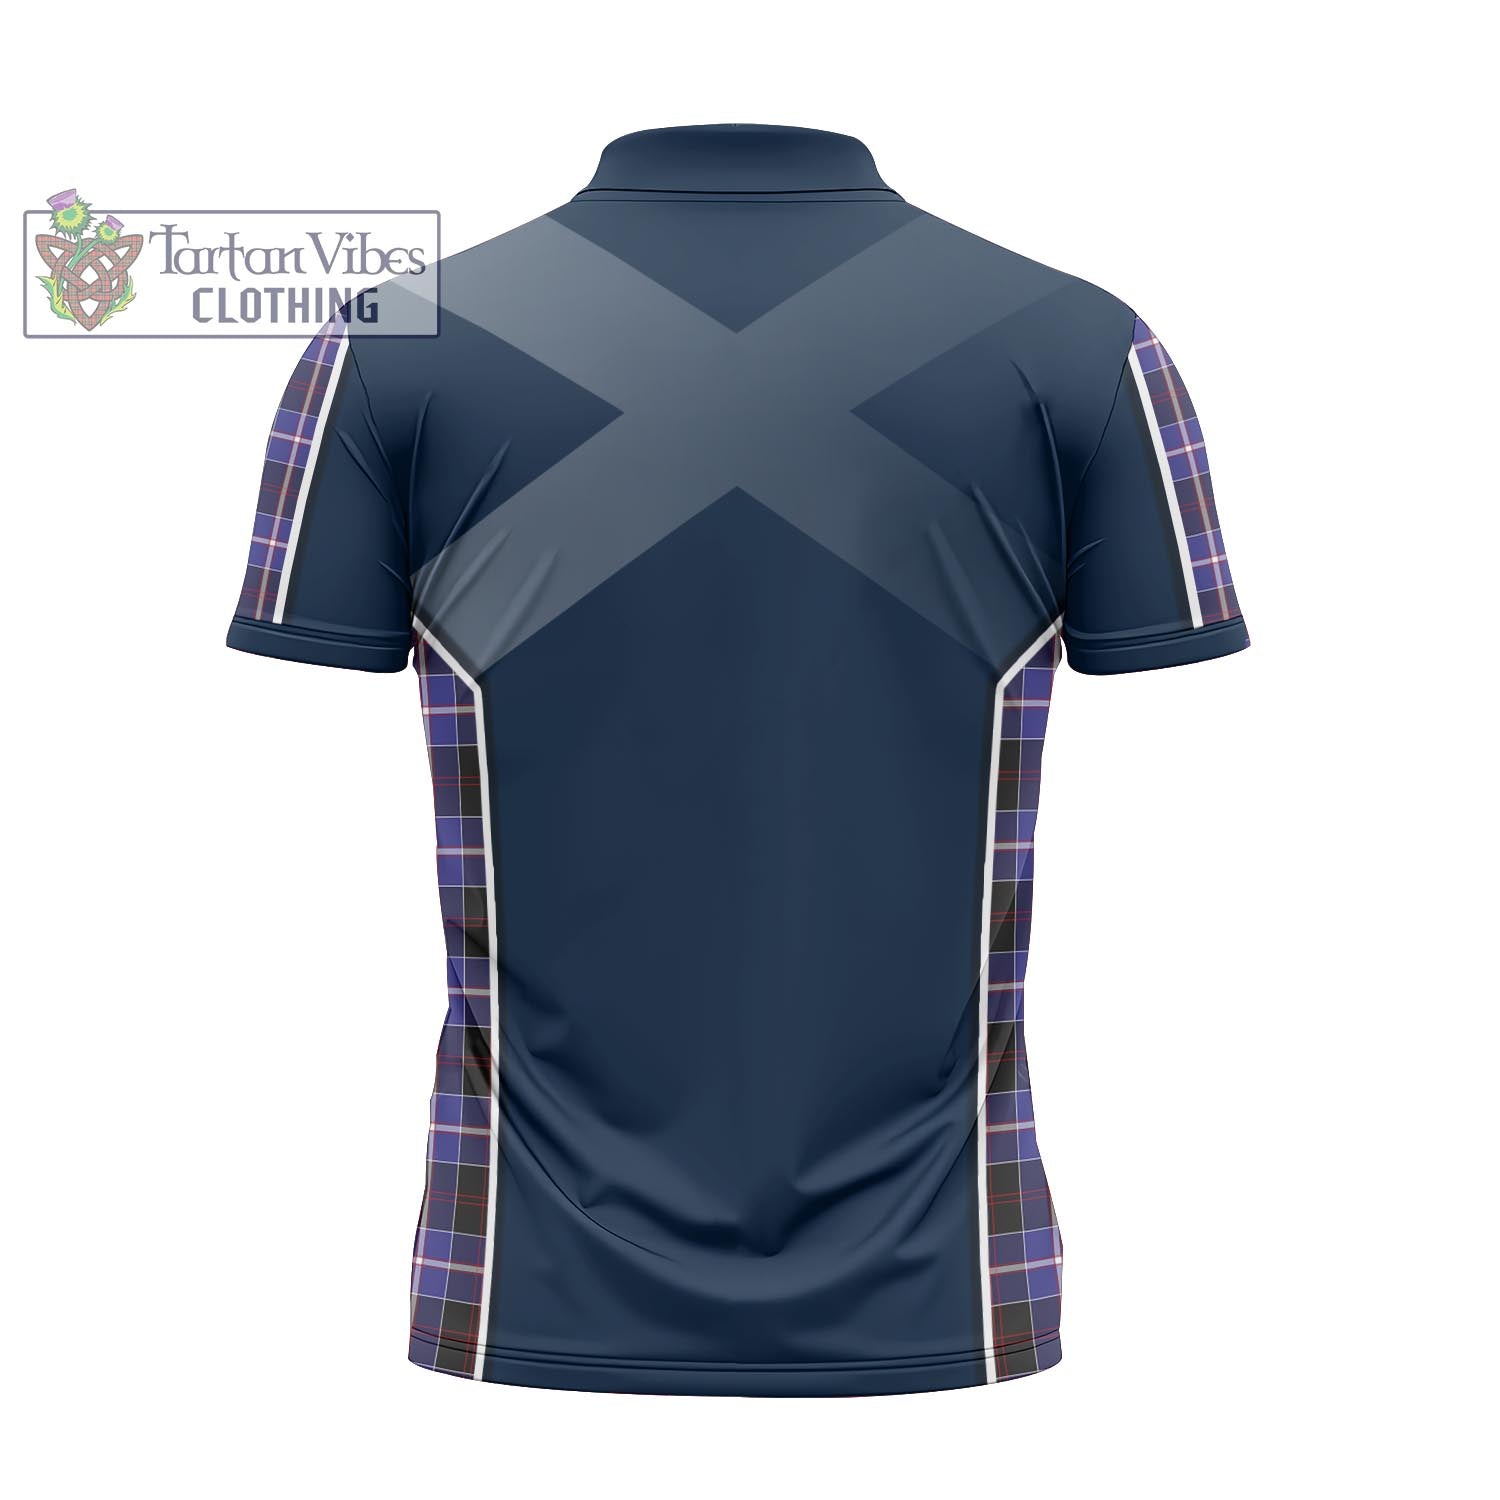 Tartan Vibes Clothing Dunlop Modern Tartan Zipper Polo Shirt with Family Crest and Scottish Thistle Vibes Sport Style